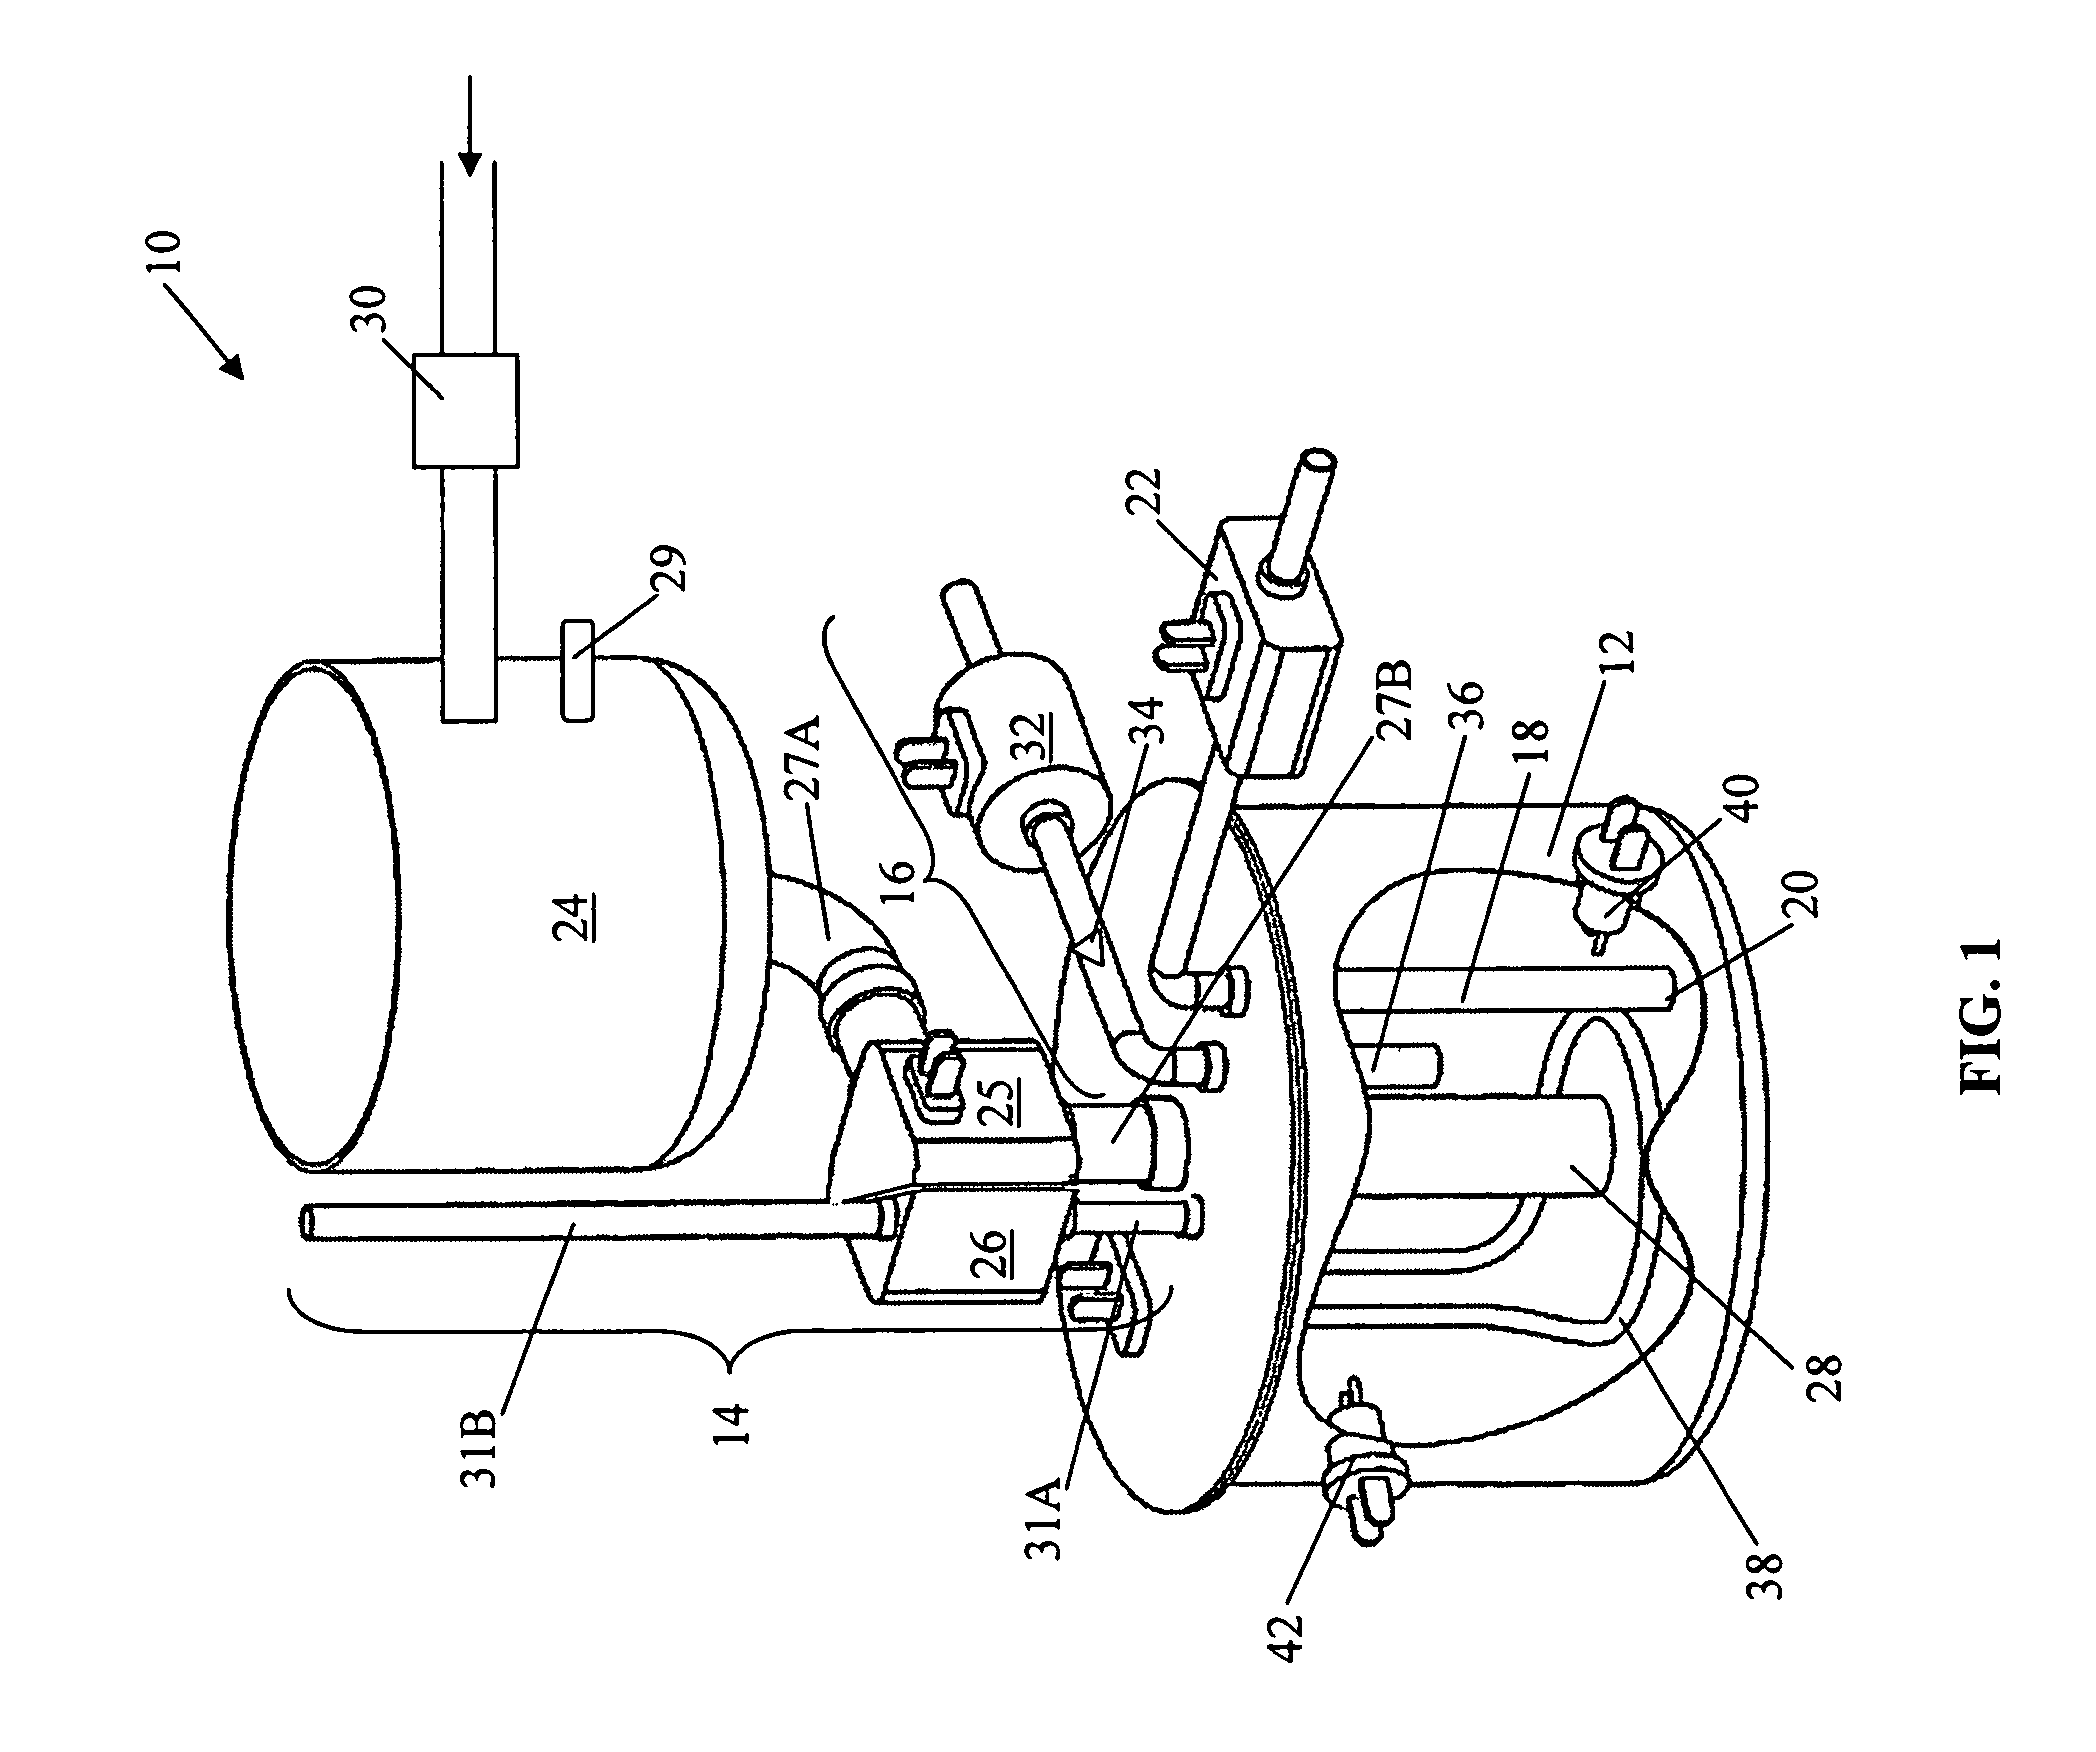 Method and apparatus for dispensing liquid in a beverage brewing machine